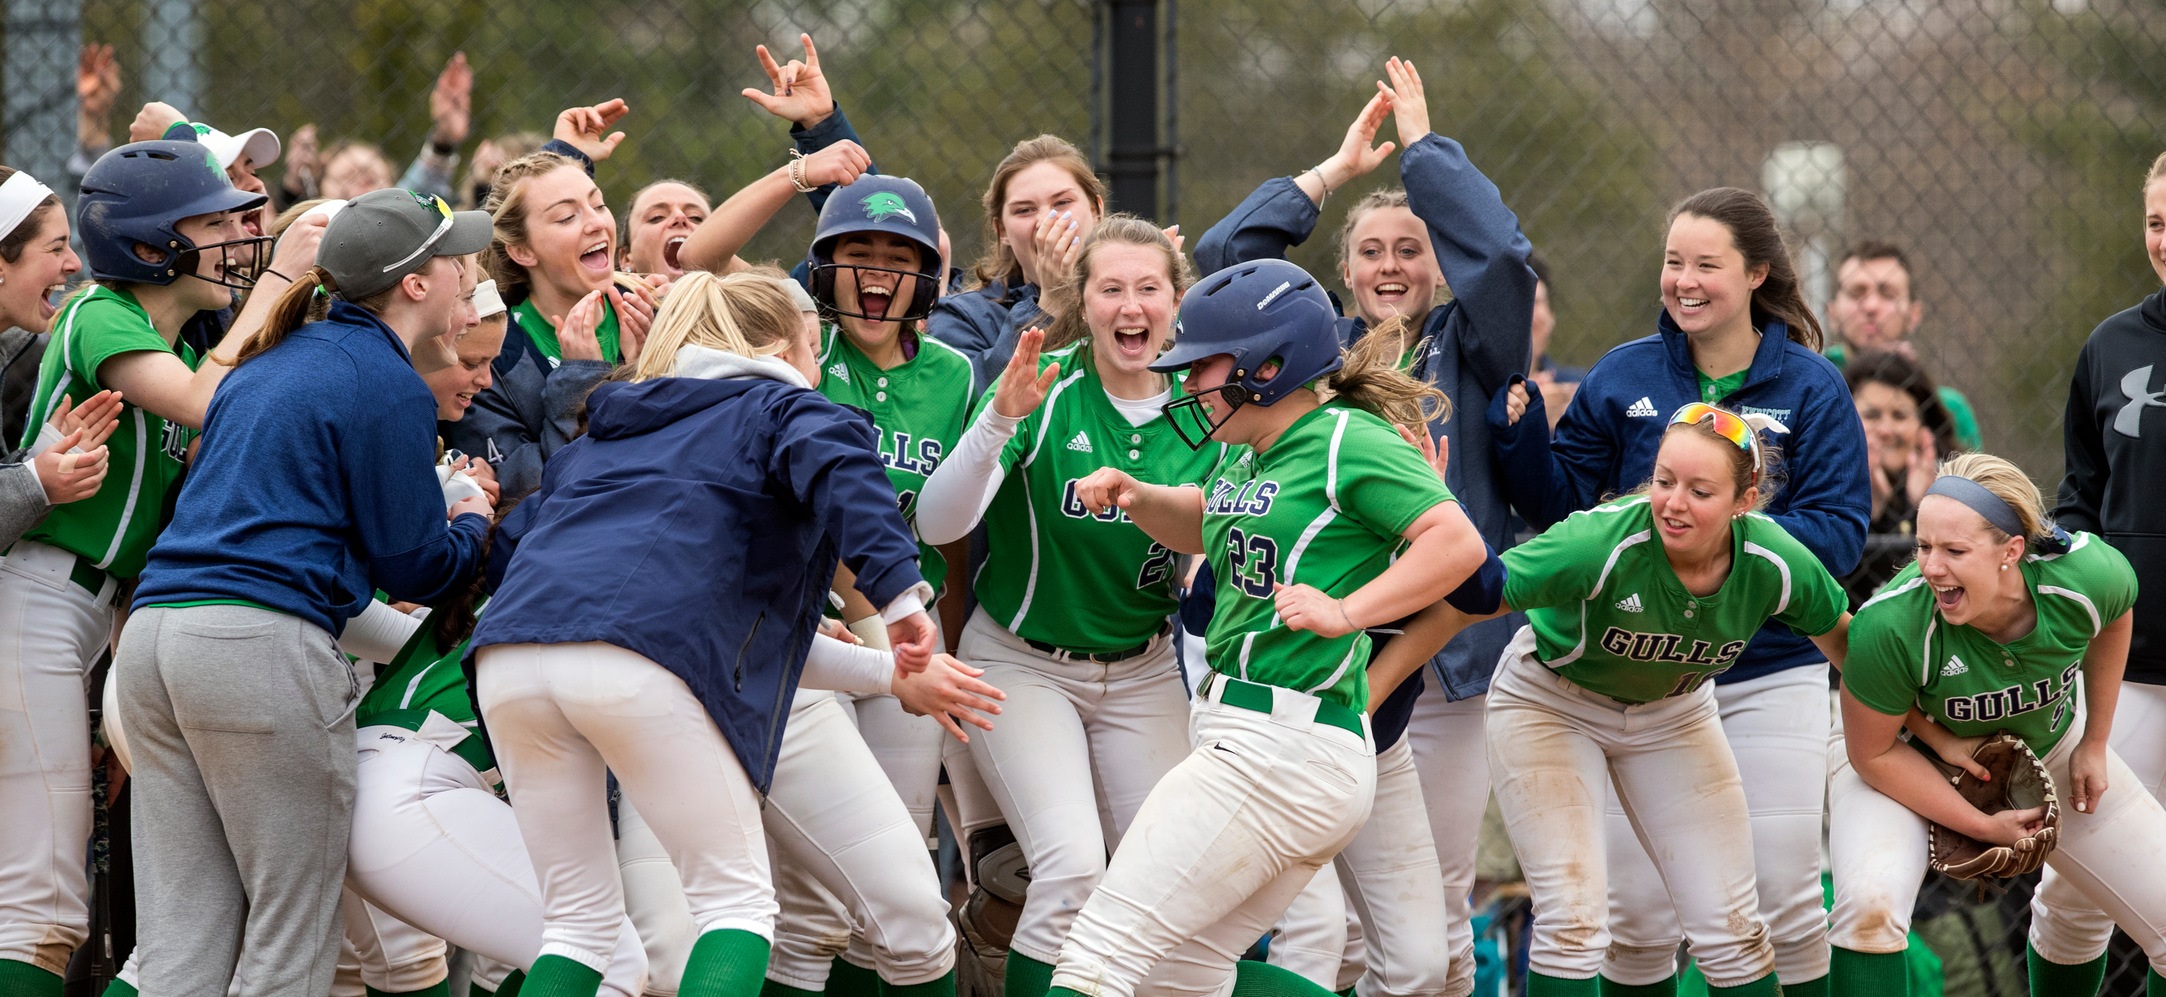 Hayley Arduini crosses home plate after a home run as her teammates celebrate around her. 